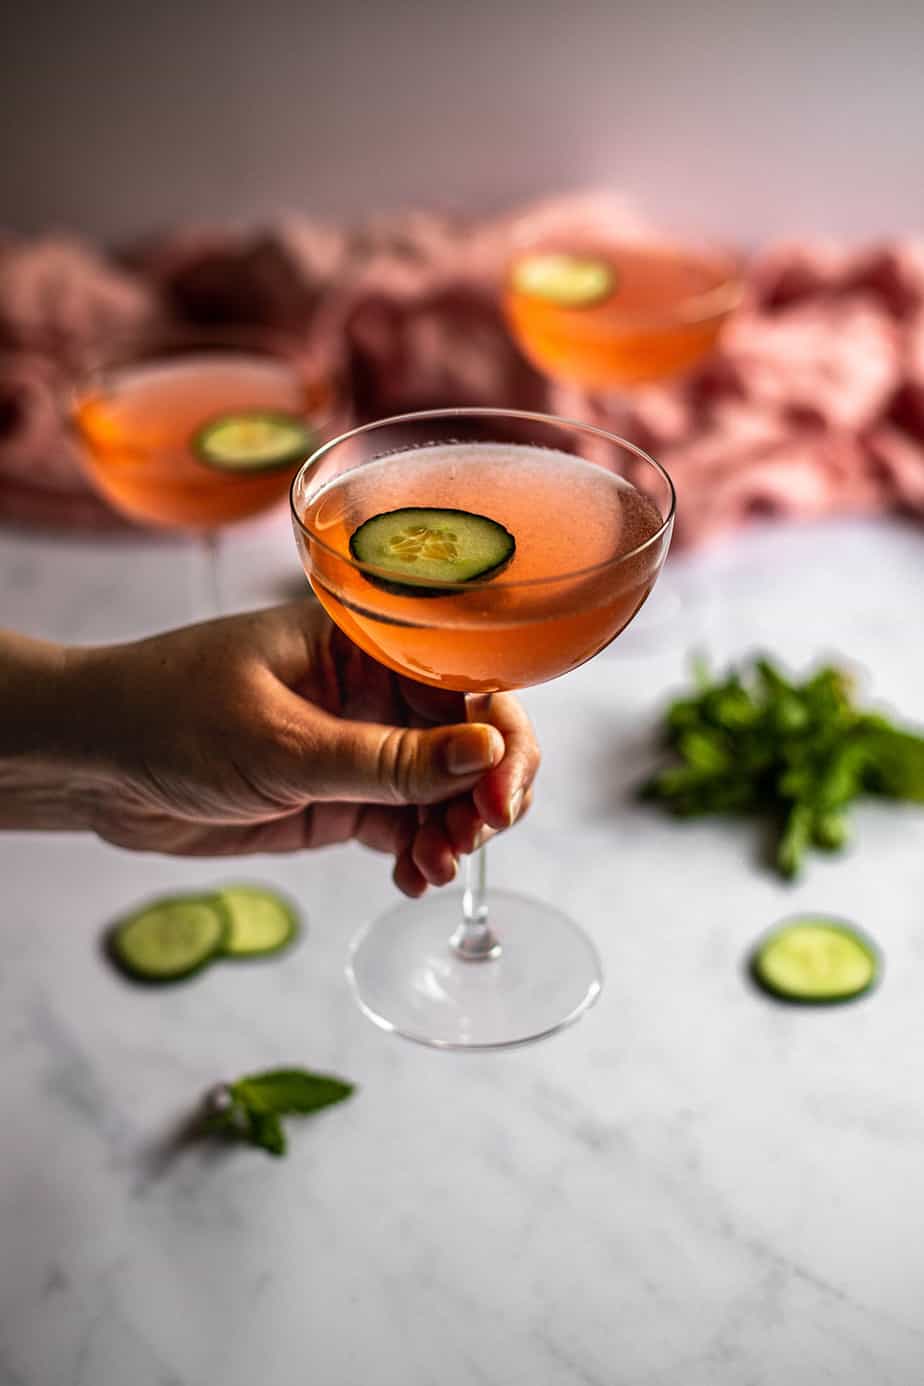 a hand holding a coupe glass filled with pink liquid and garnished with a cucumber slice